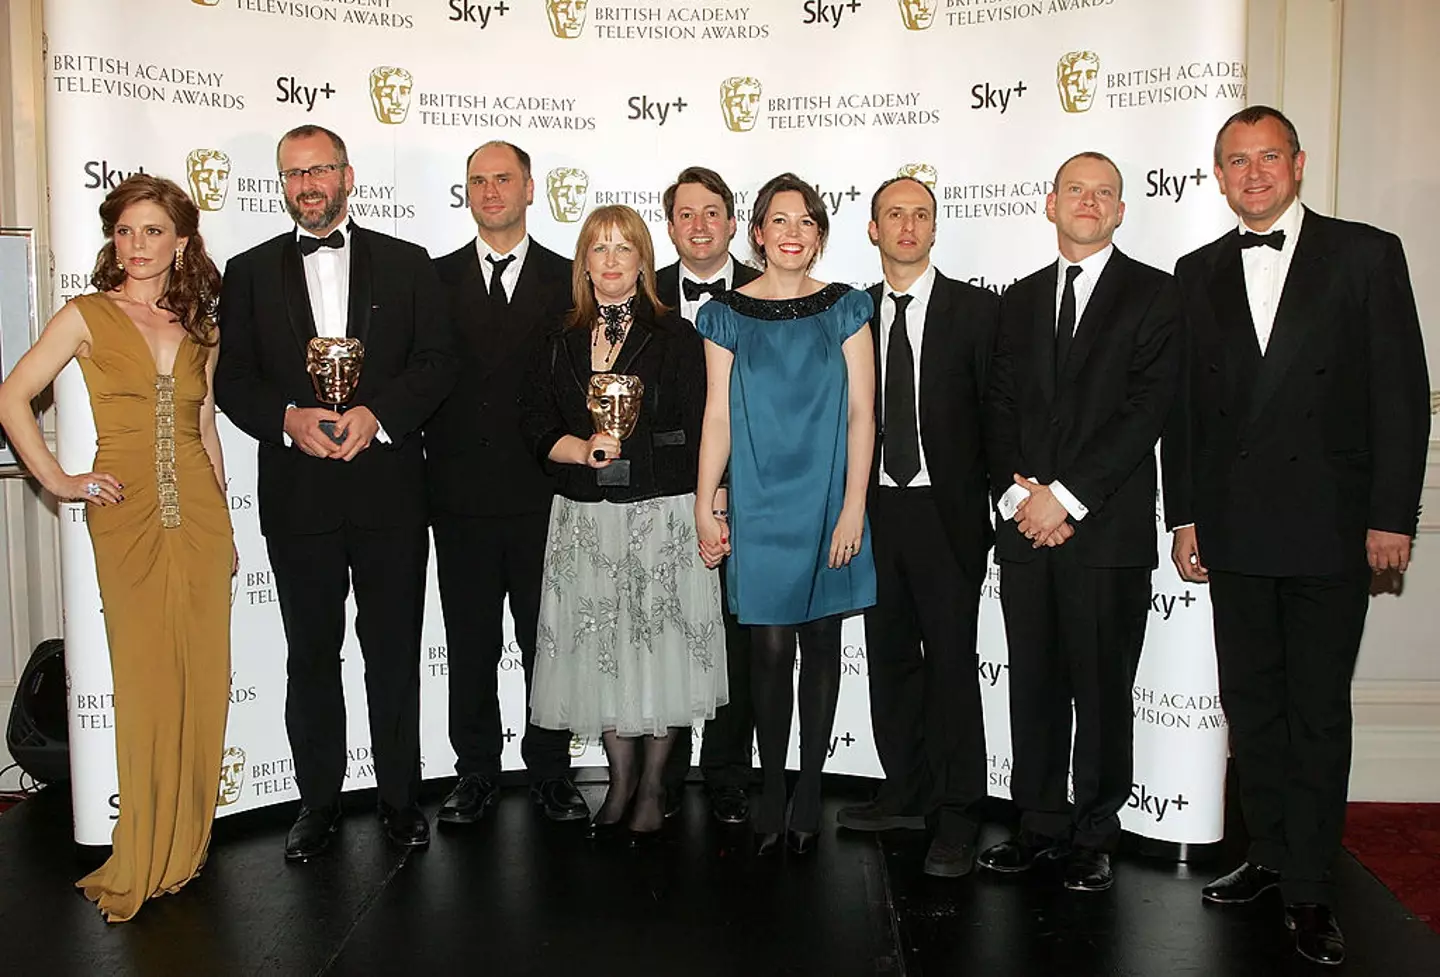 Olivia Coleman with the Peep Show writers and cast at the British Academy Television Awards 2008.